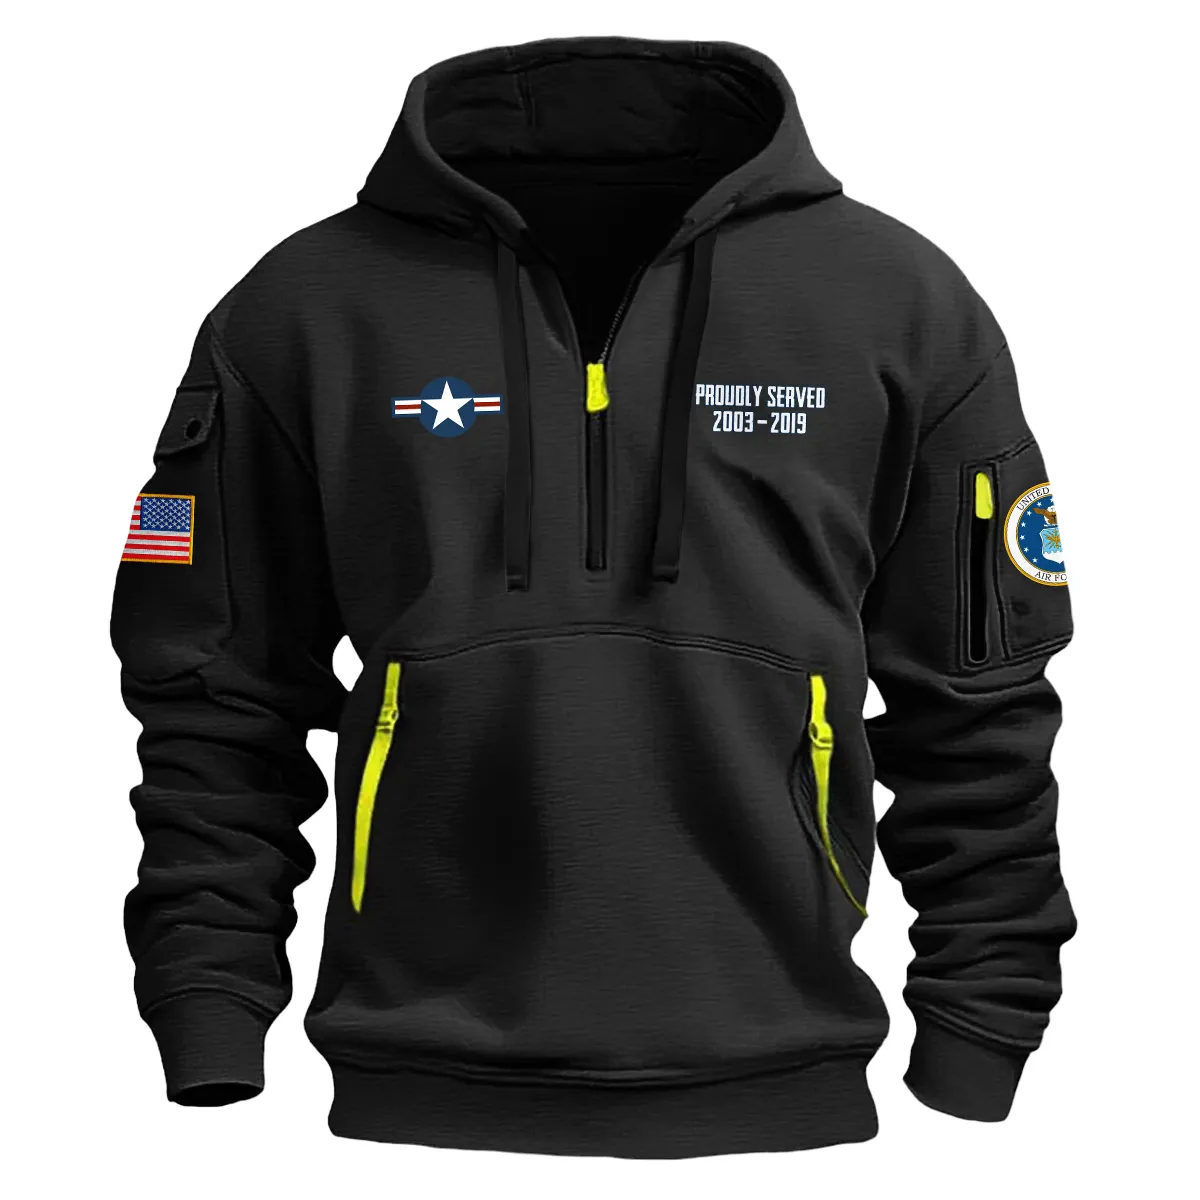 US Military All Branches! Personalized Gift E5-SSGT U.S. Air Force Fashion Hoodie Half Zipper